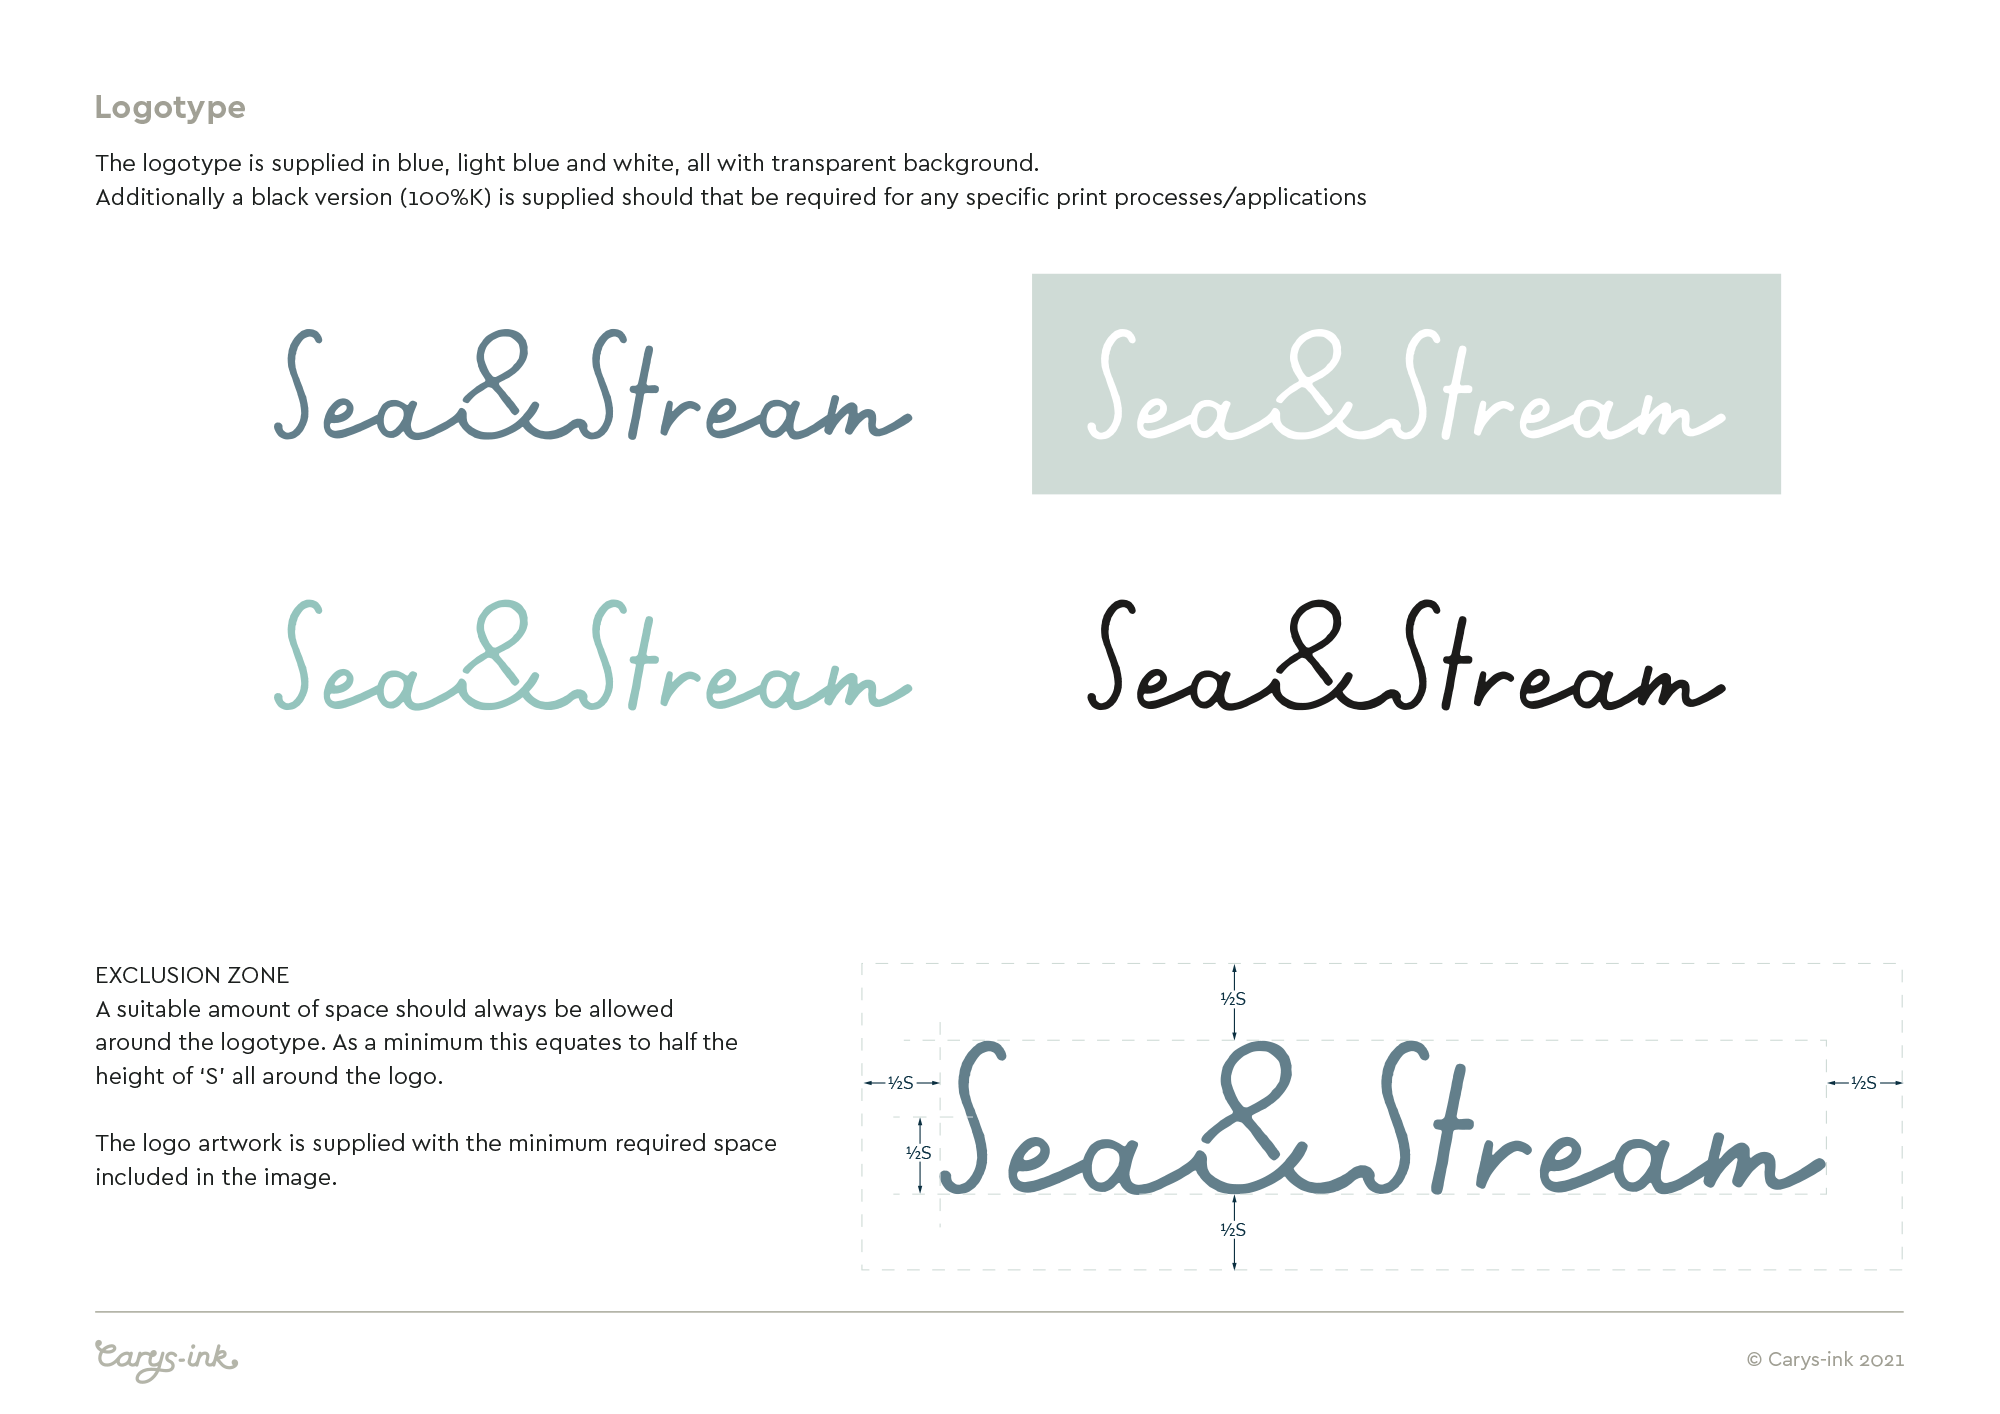 Sea&Stream_BrandDelivery_03.png